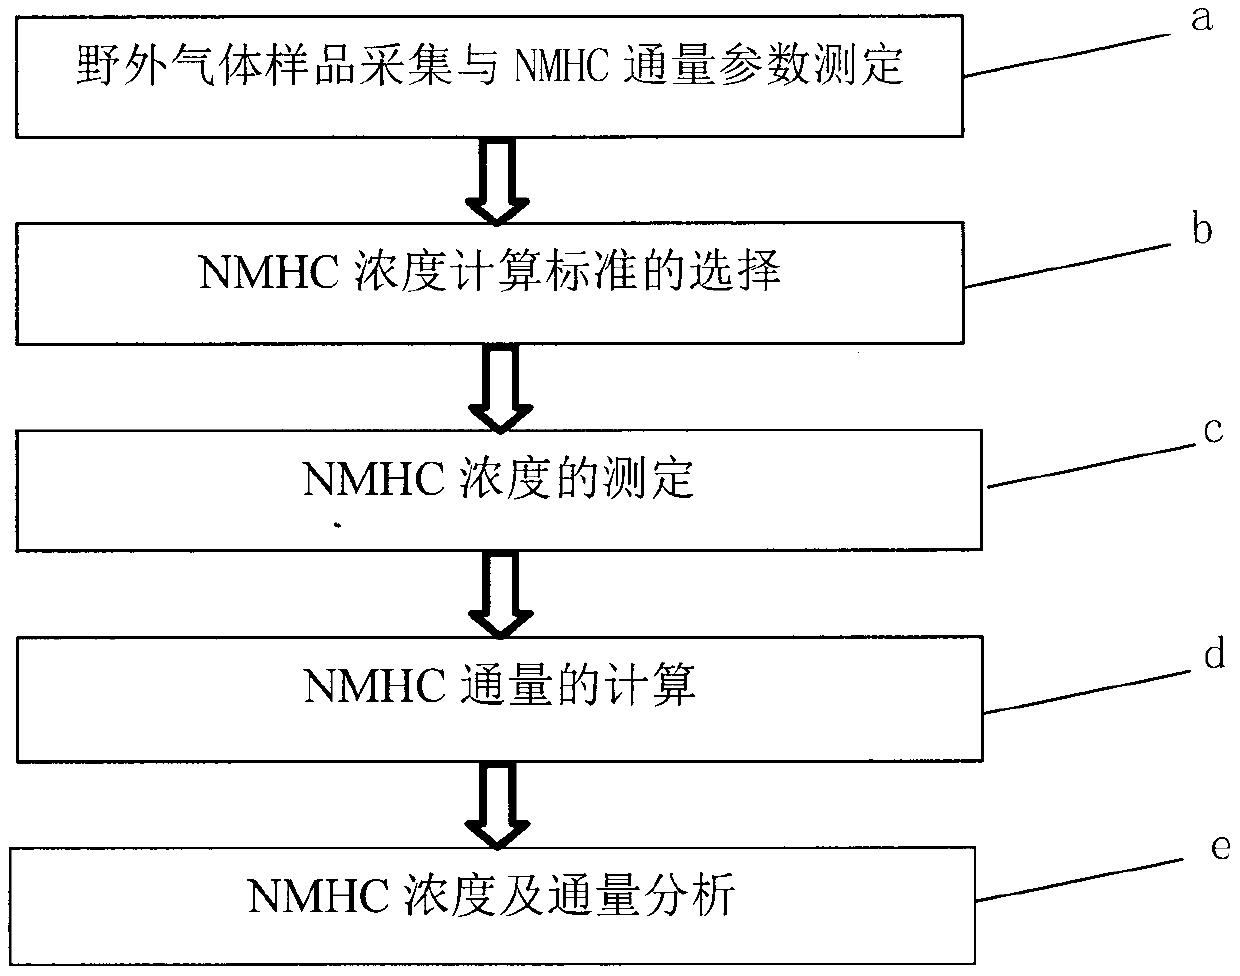 Method for determining flux of non-methane hydrocarbon (NMHC) in grassland area